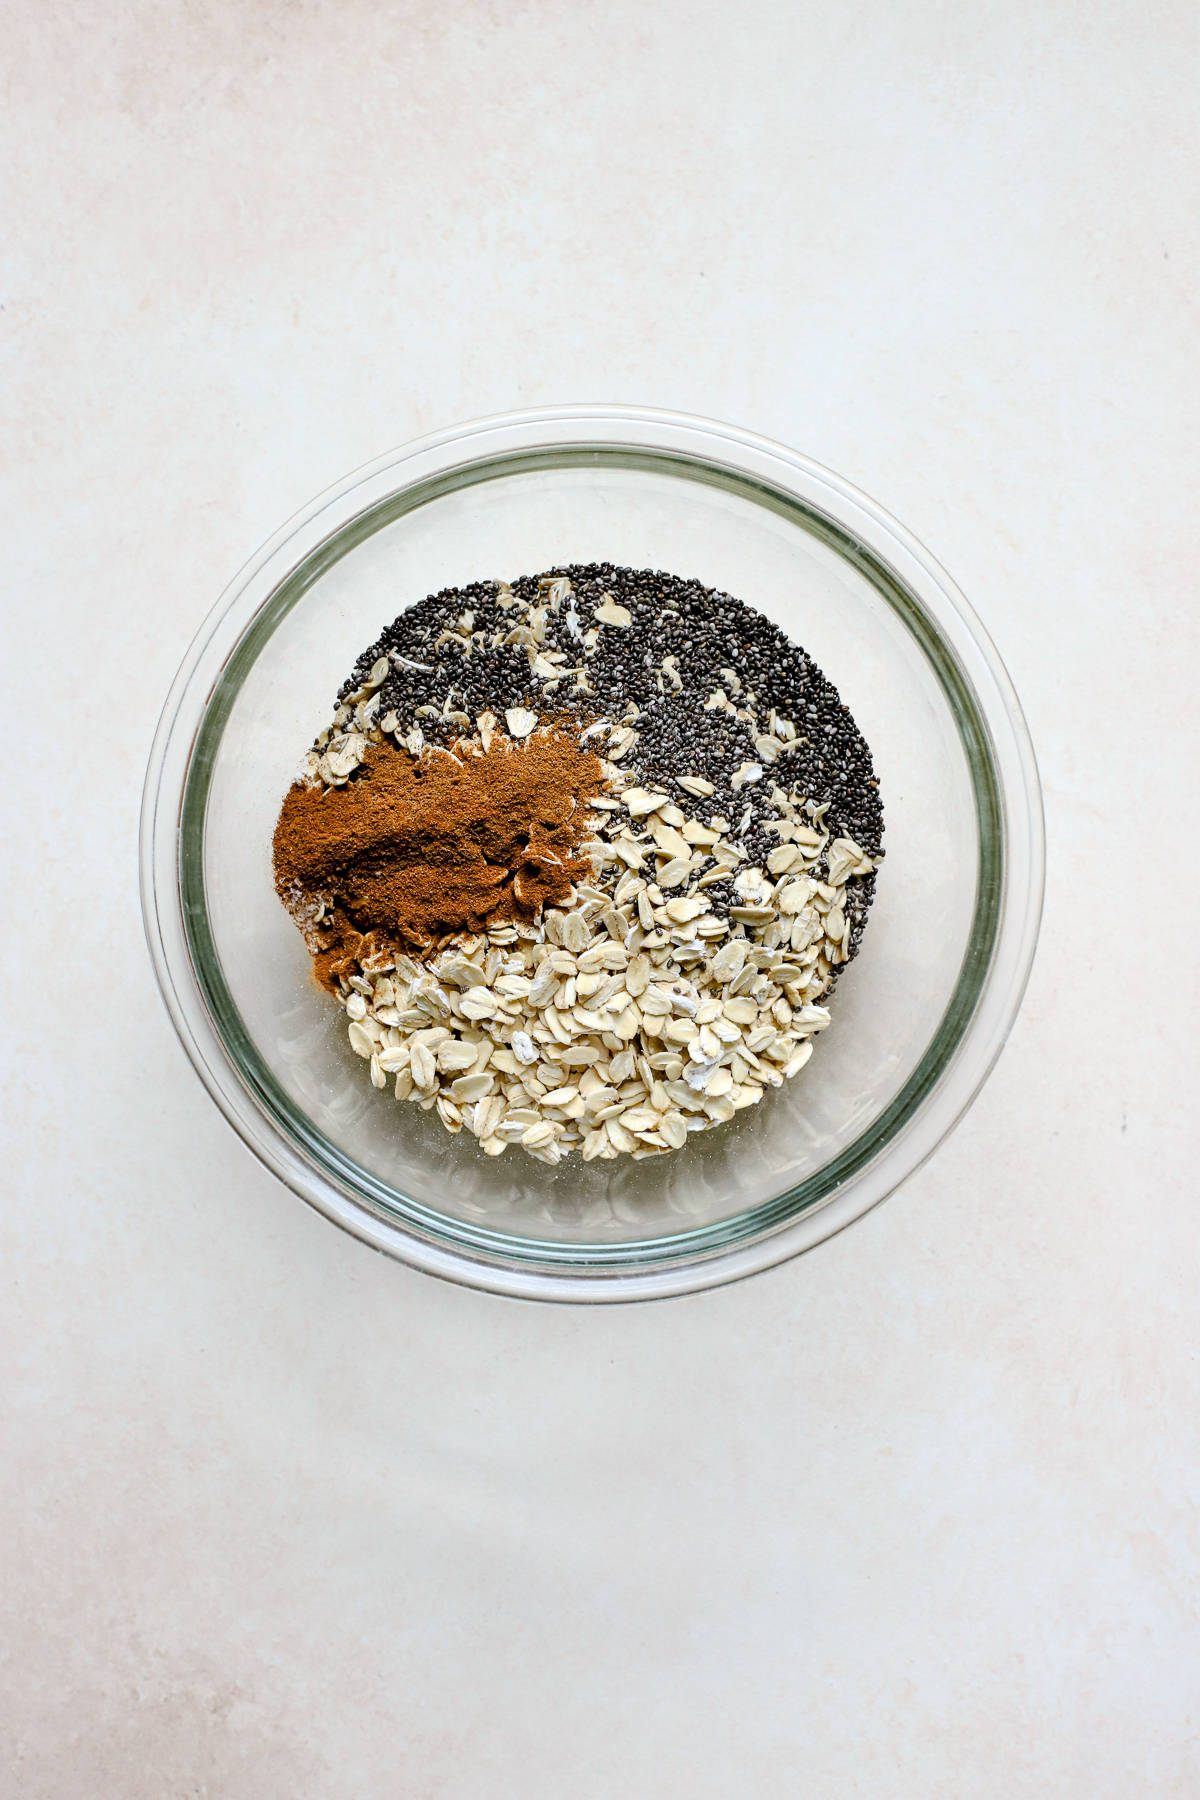 Whole rolled oats, chia seeds, pumpkin pie spice, cinnamon, and salt in a clear glass bowl on beige and white surface.